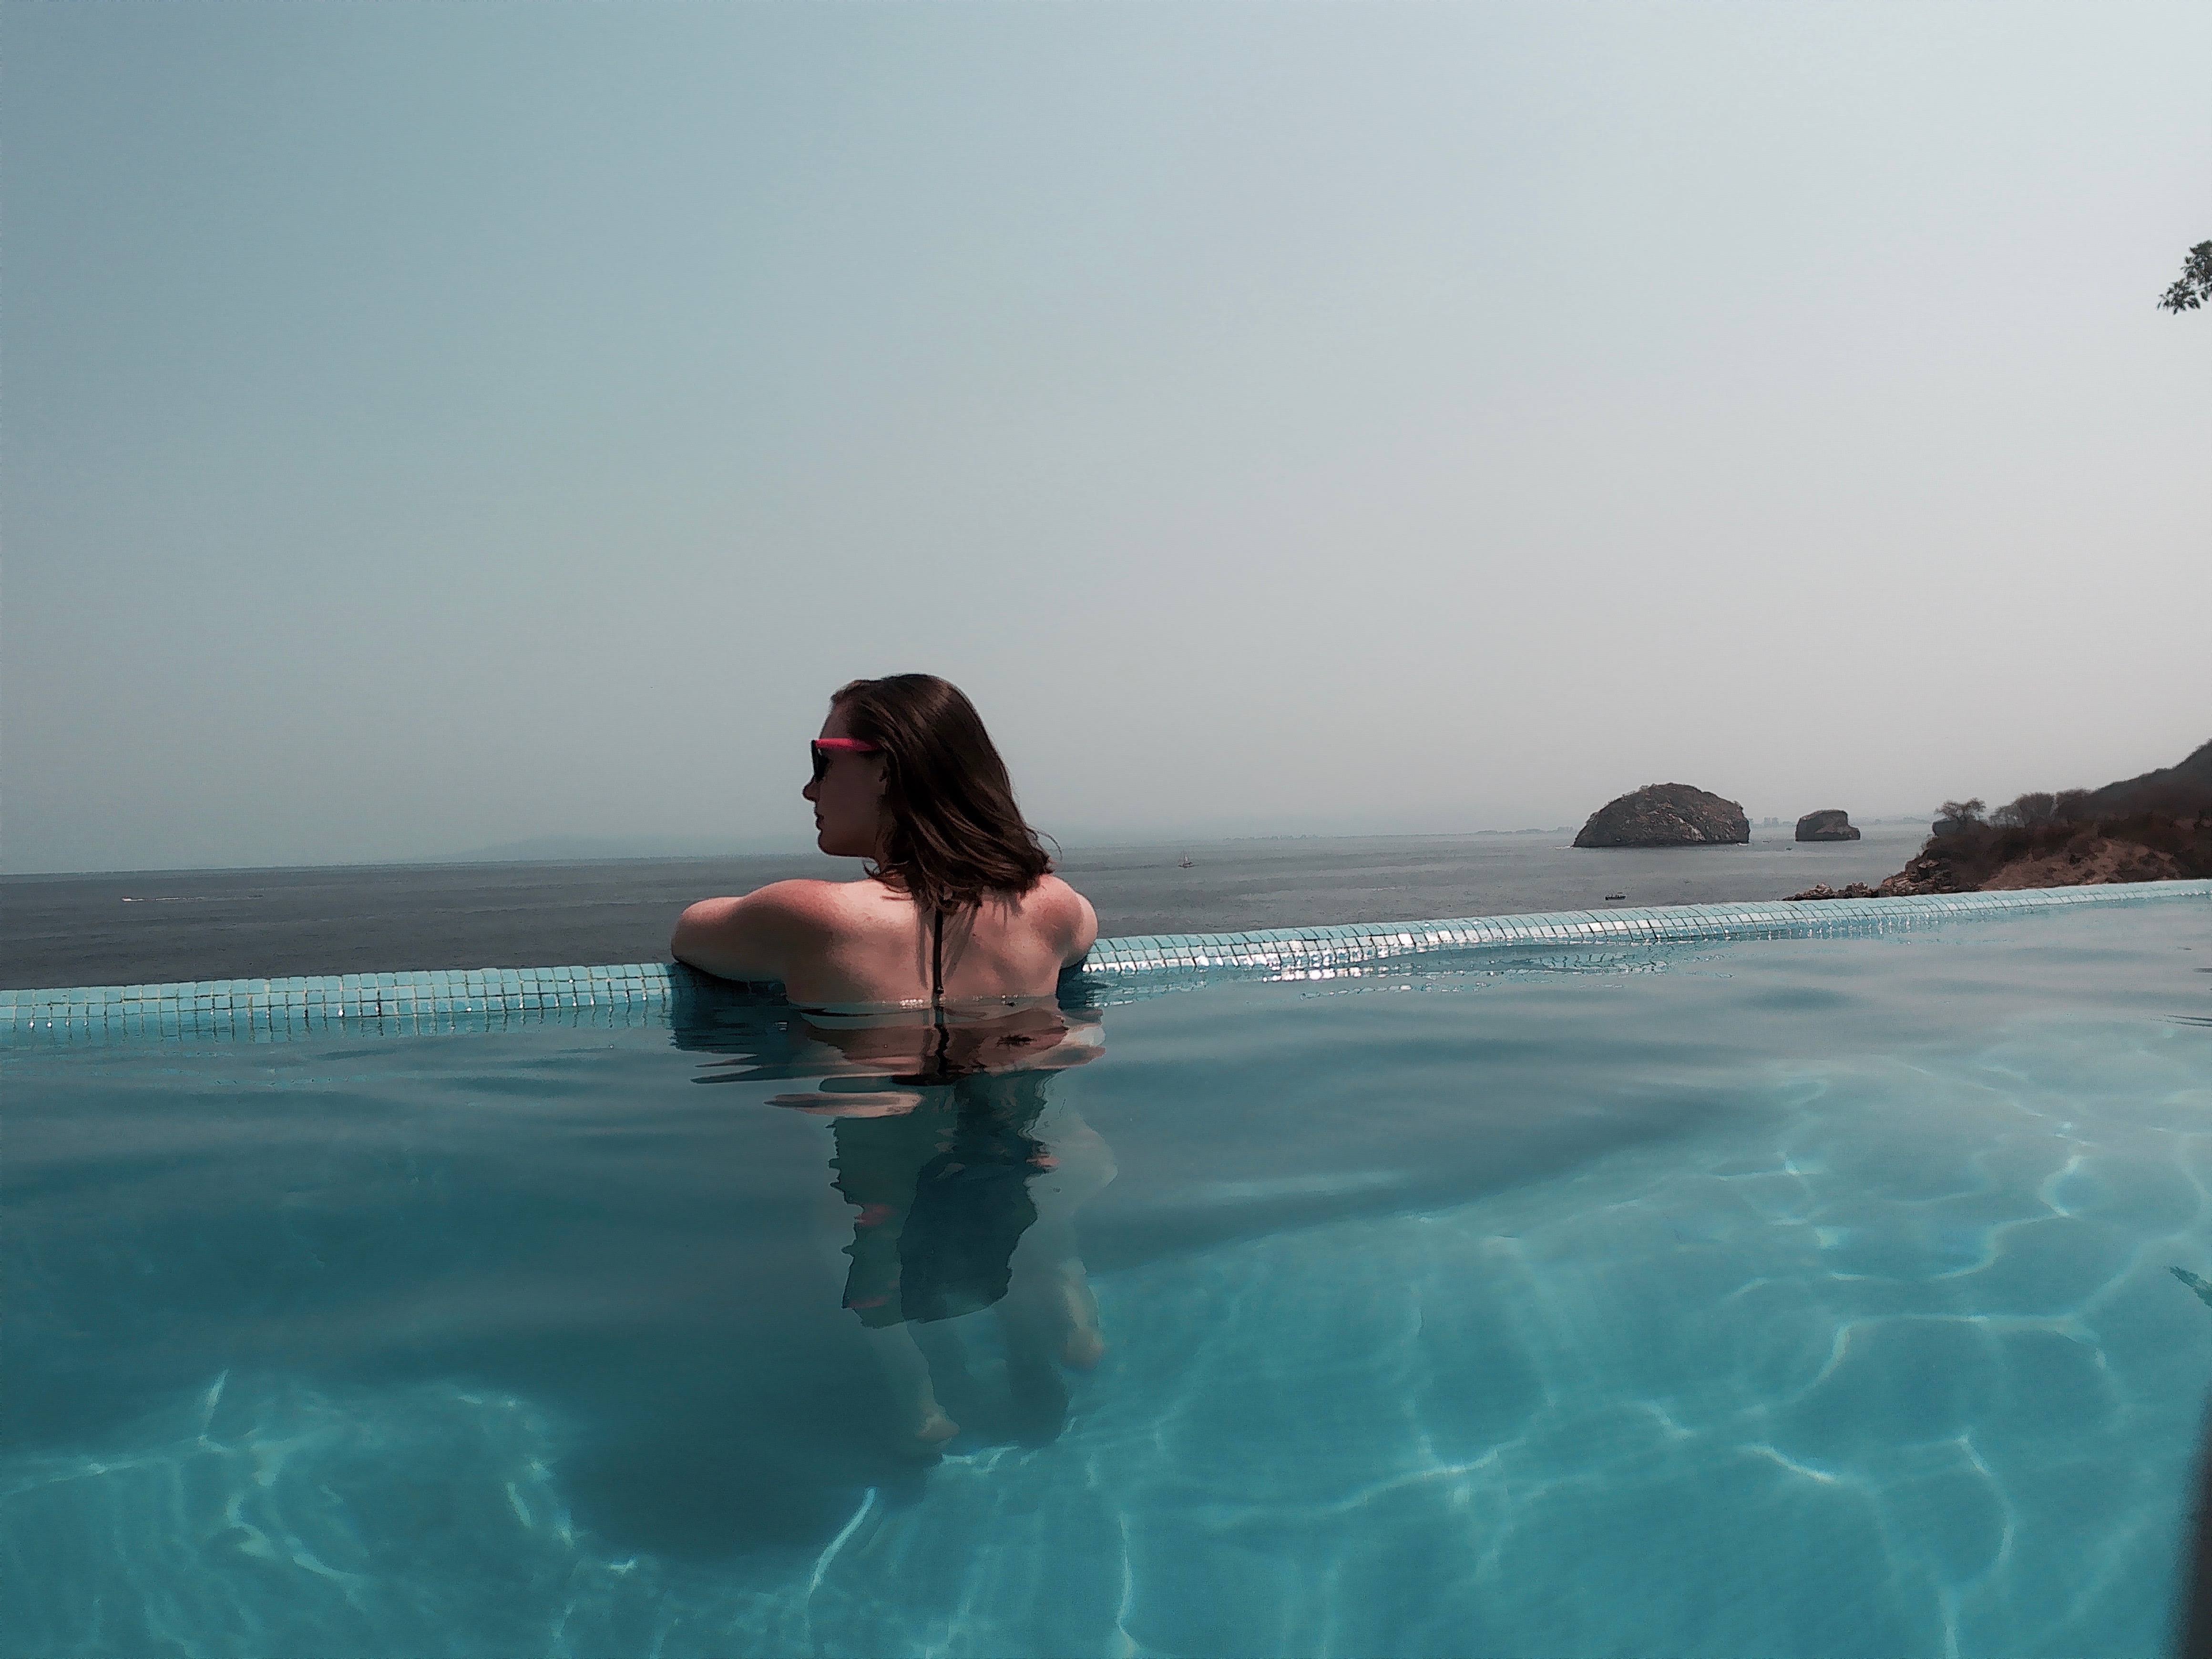 Alyssa looks out over the ocean from an infinity pool